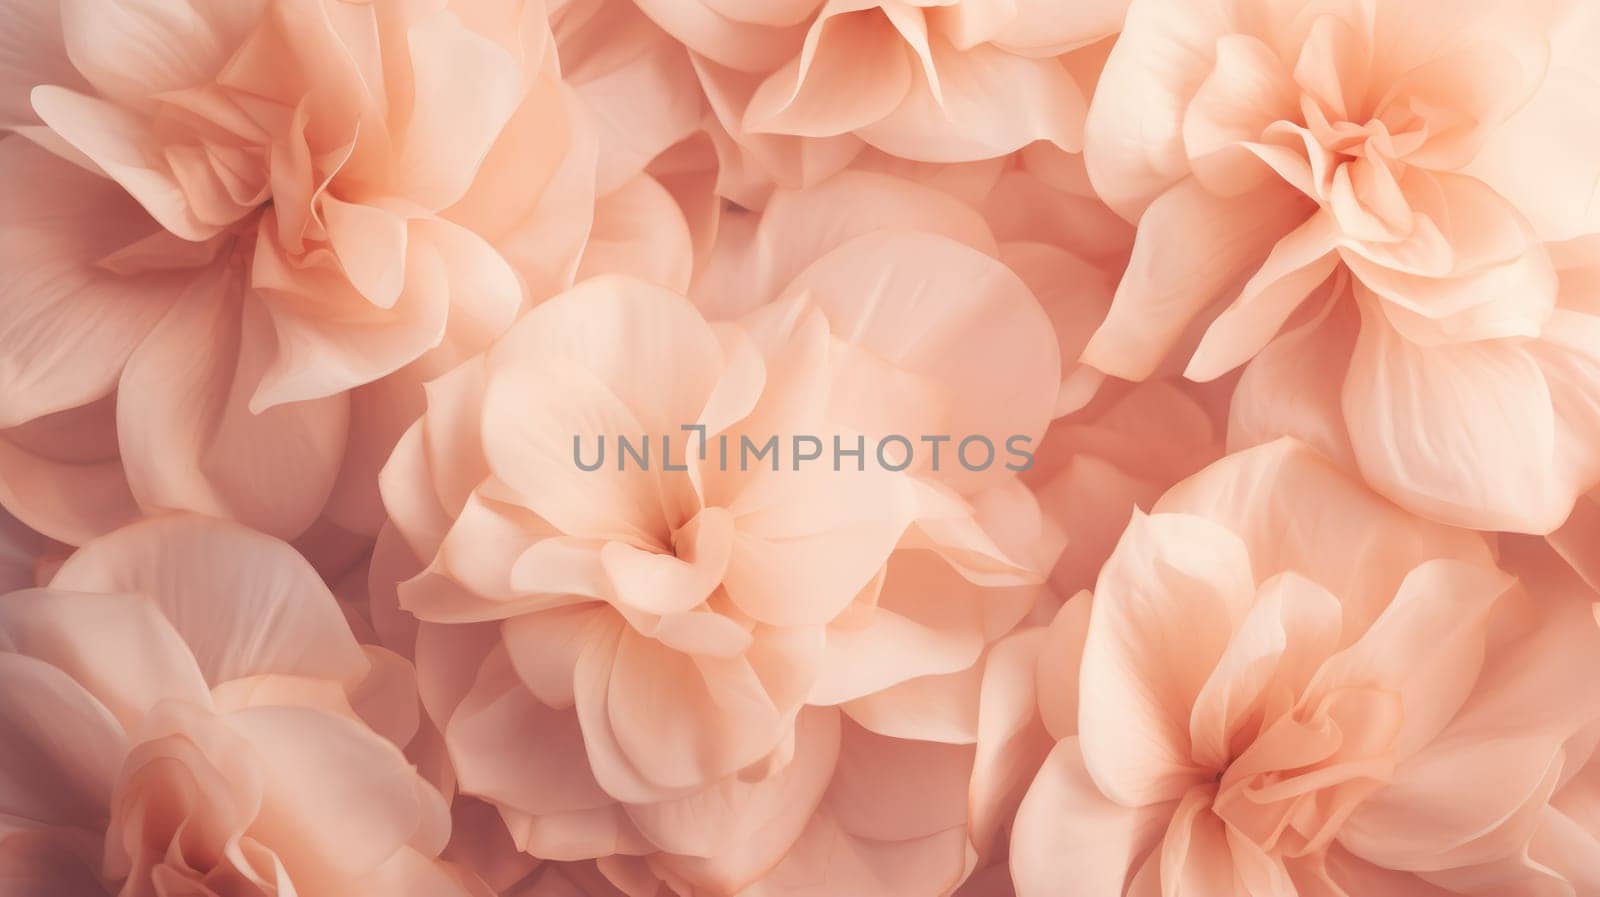 The flowers petals are a soft peach color, close up macro nature background. AI